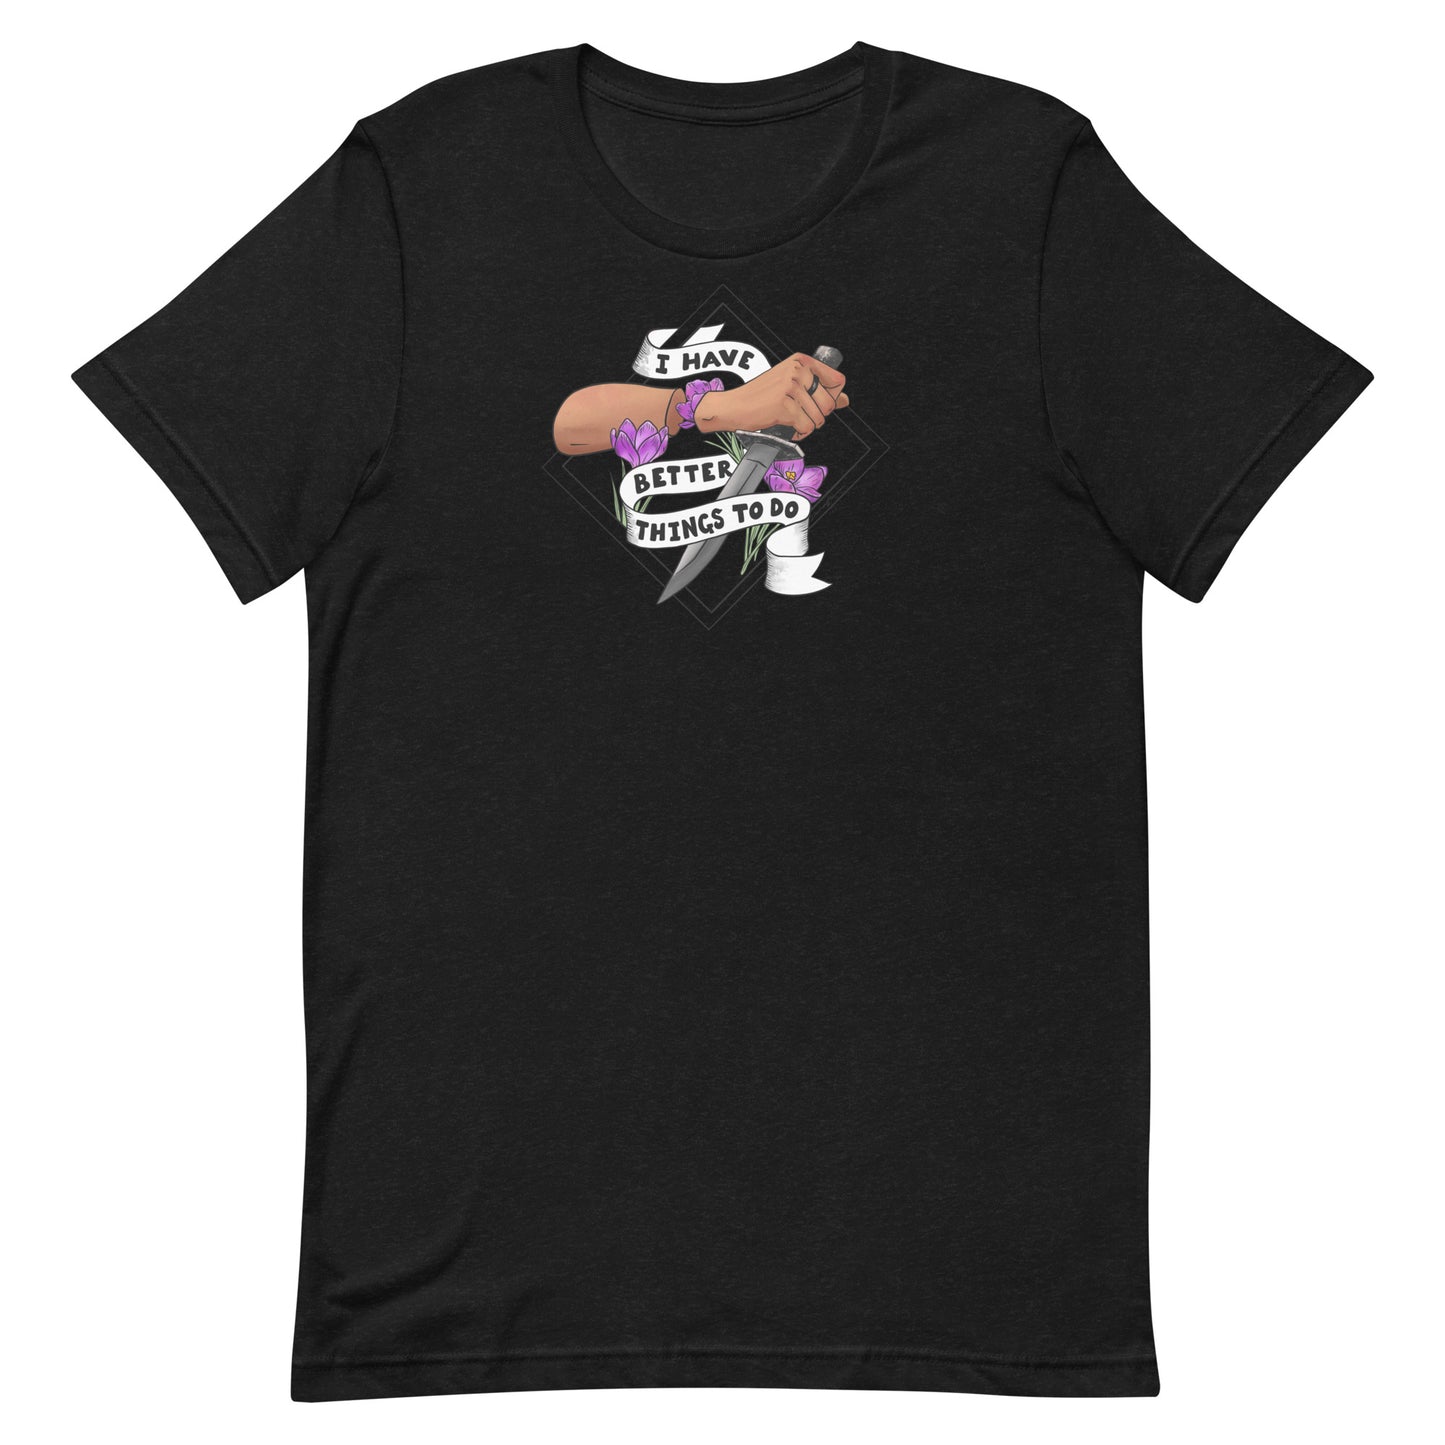 I Have Better Things to Do Asexual Ace Pride T-Shirt